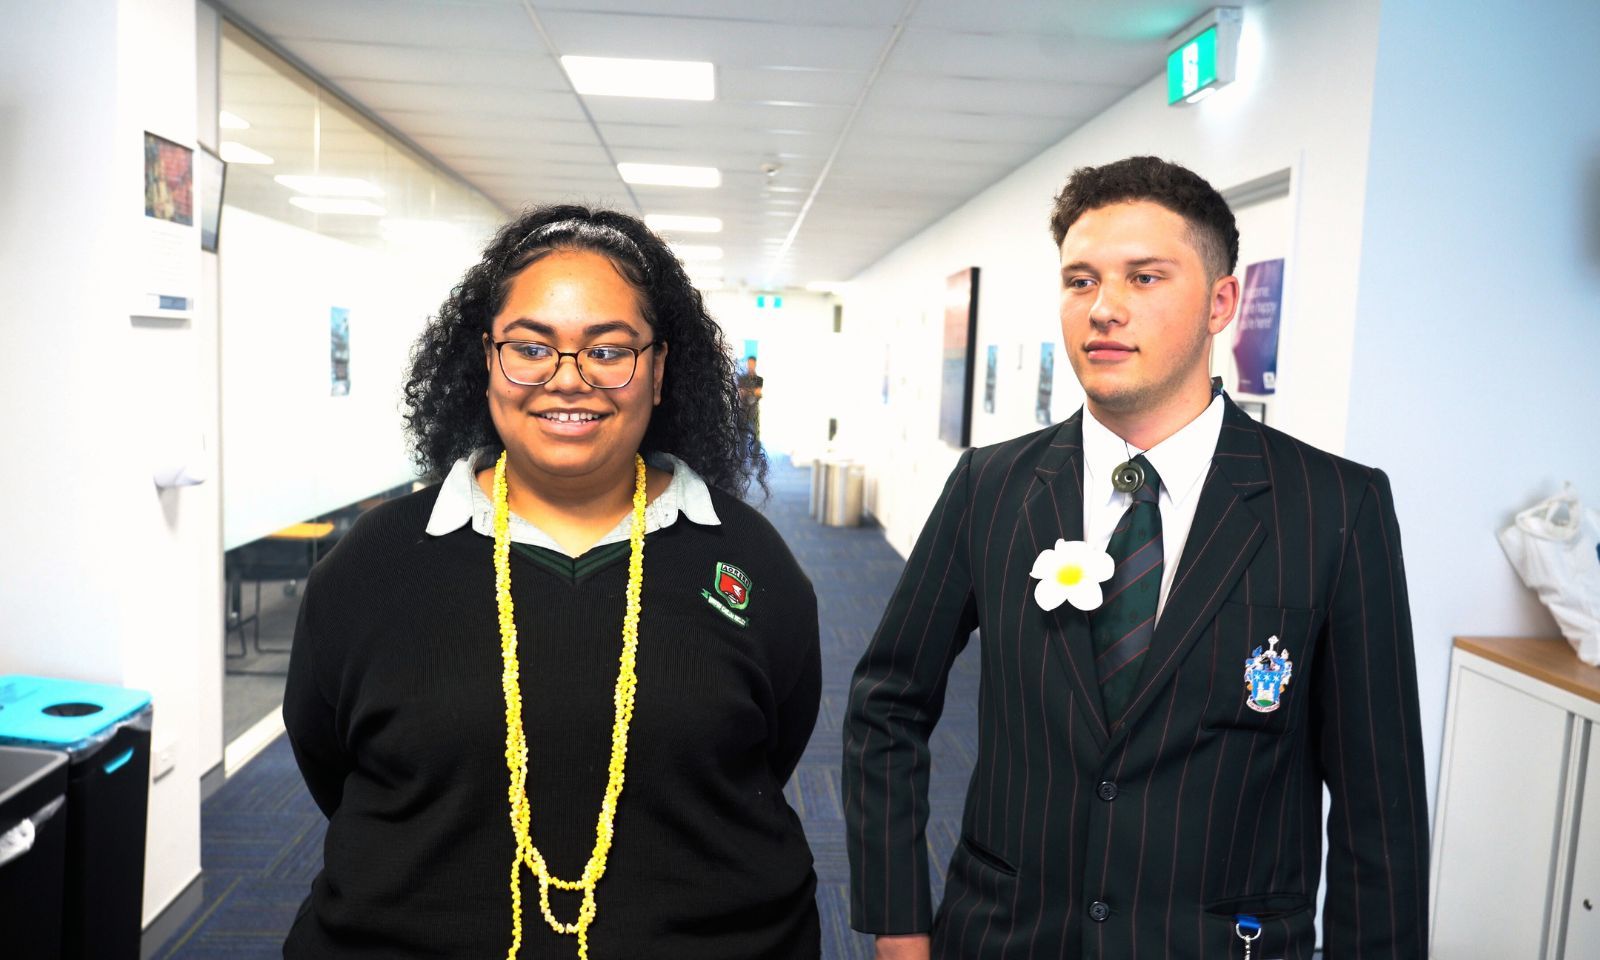 Gio Rose from Aorere College and Joshua Rehutai-Baker from Dilworth School prepare for their final stands at Polyfest. Photo/Candice Ama/PMN News